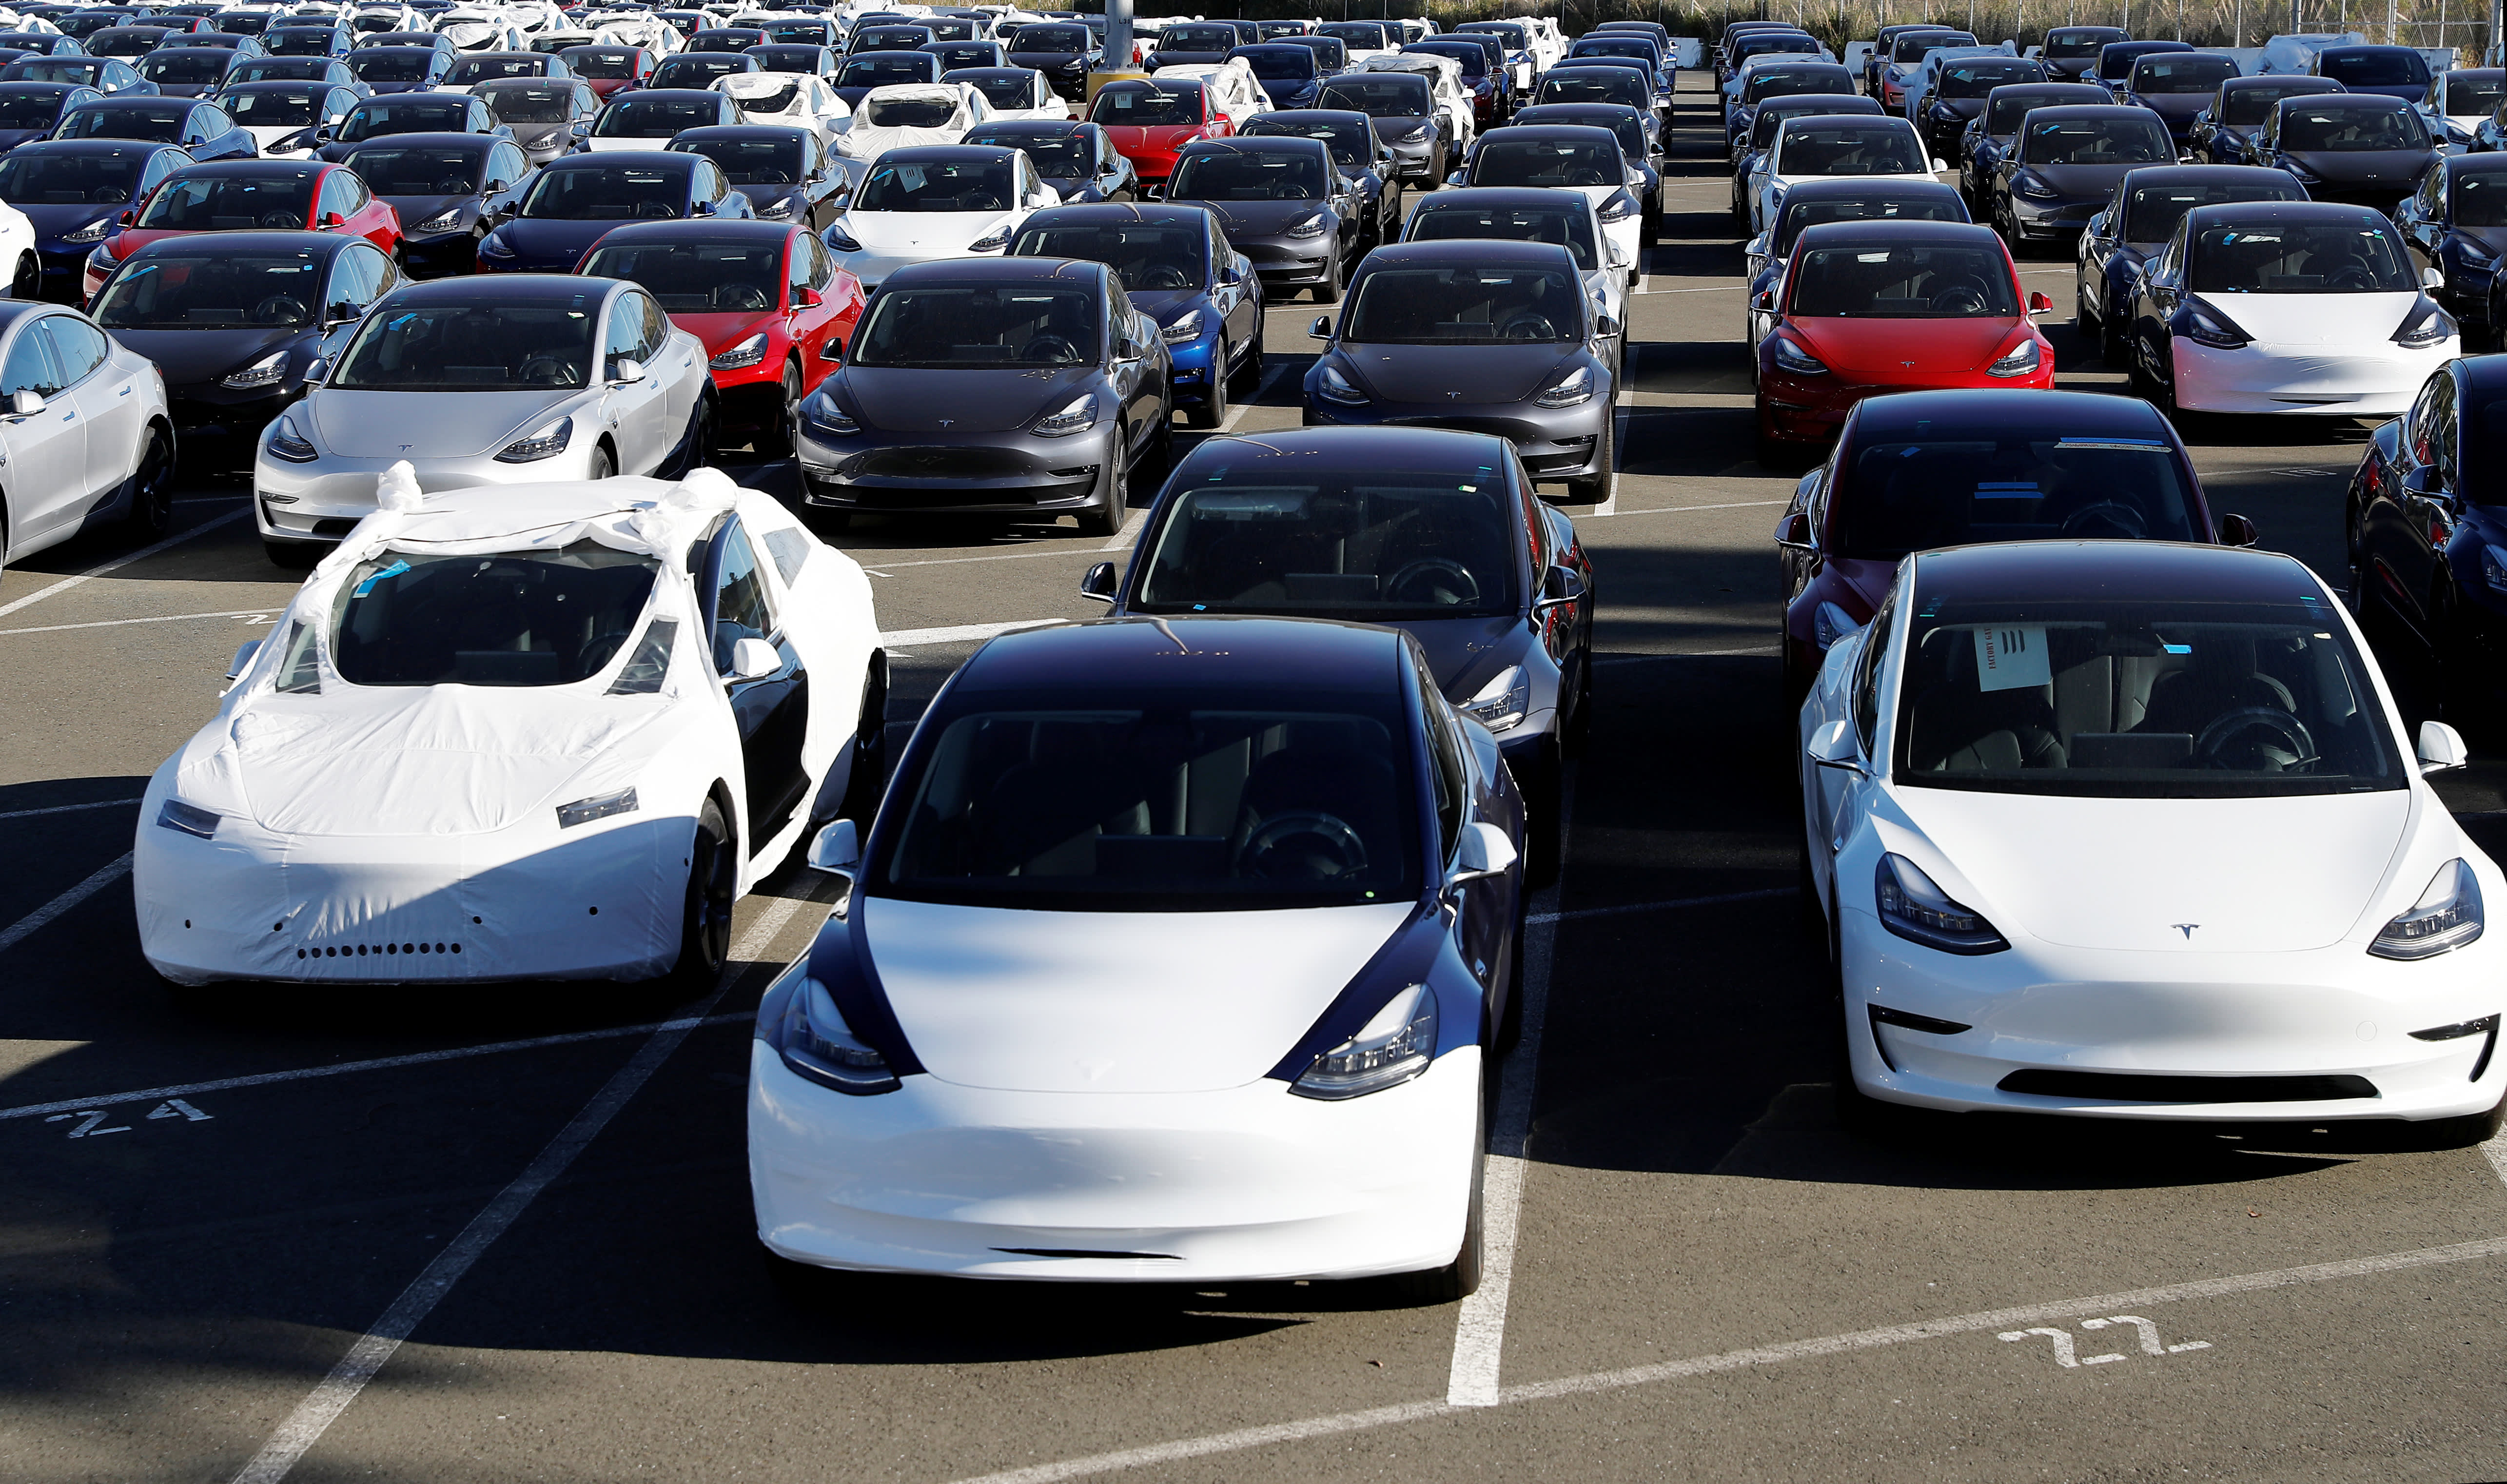 Tesla owns service centers: Pros and cons